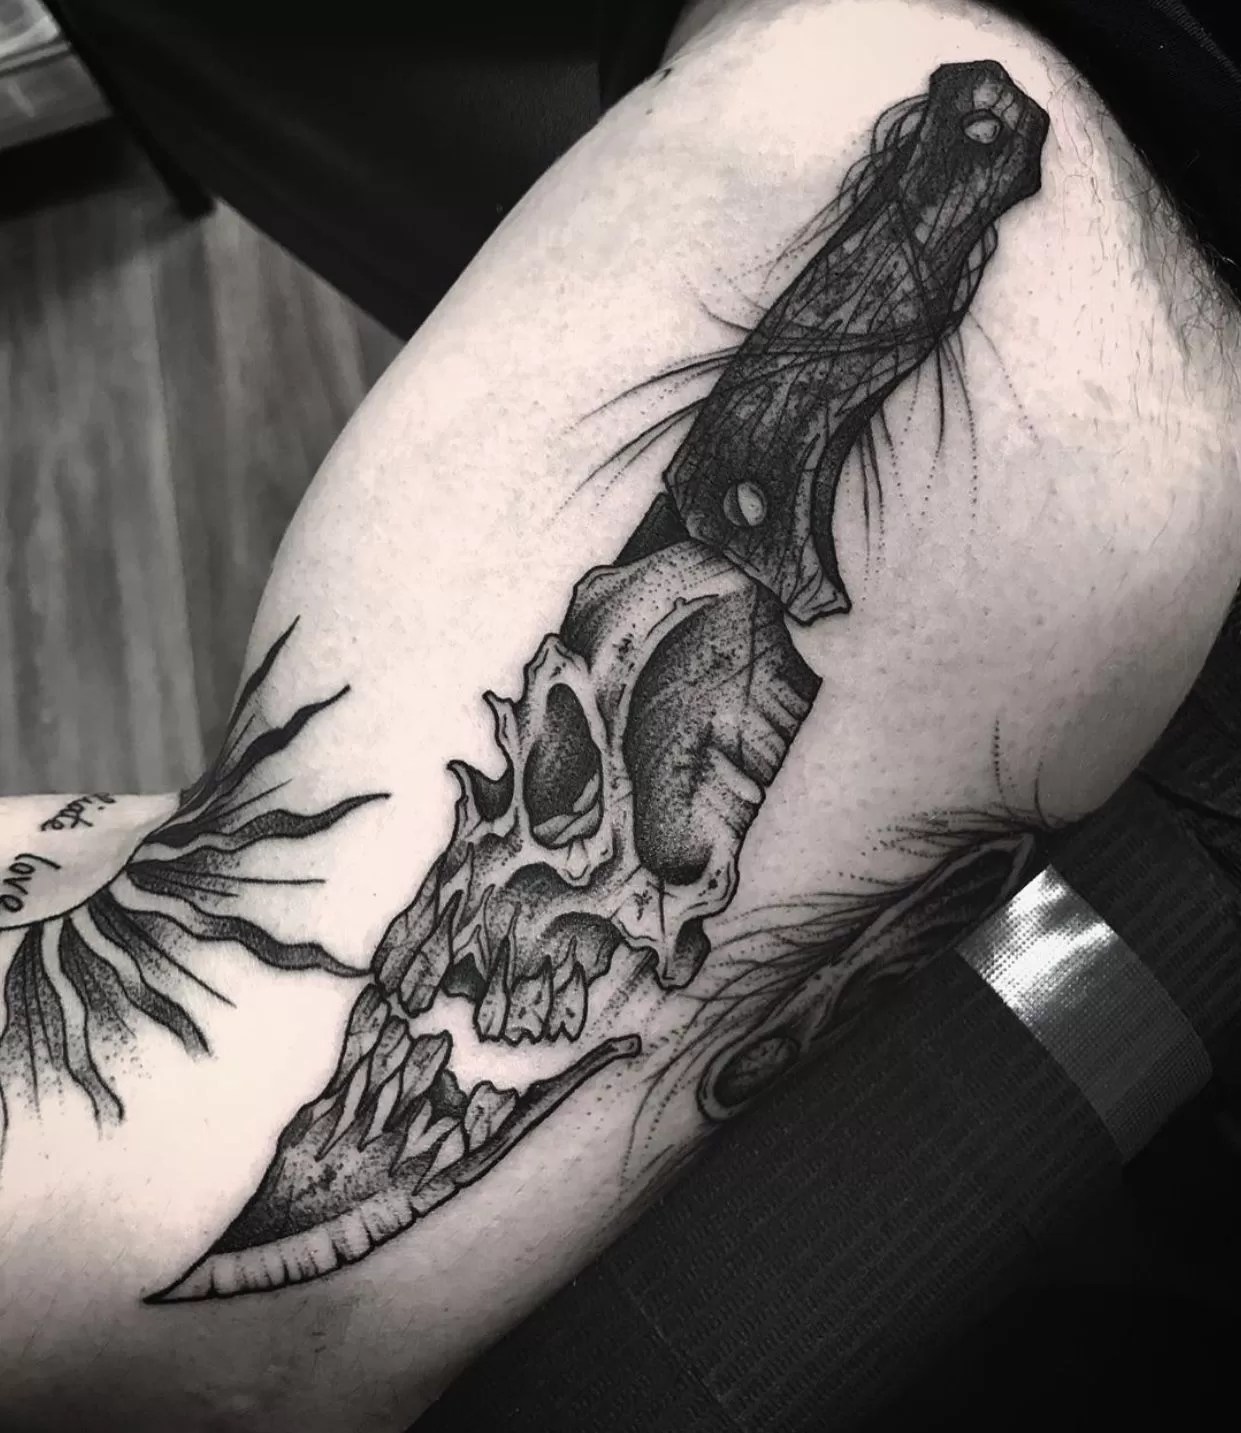 Knife Tattoo Meaning: The Deeper Meanings Behind Popular Tattoo Designs